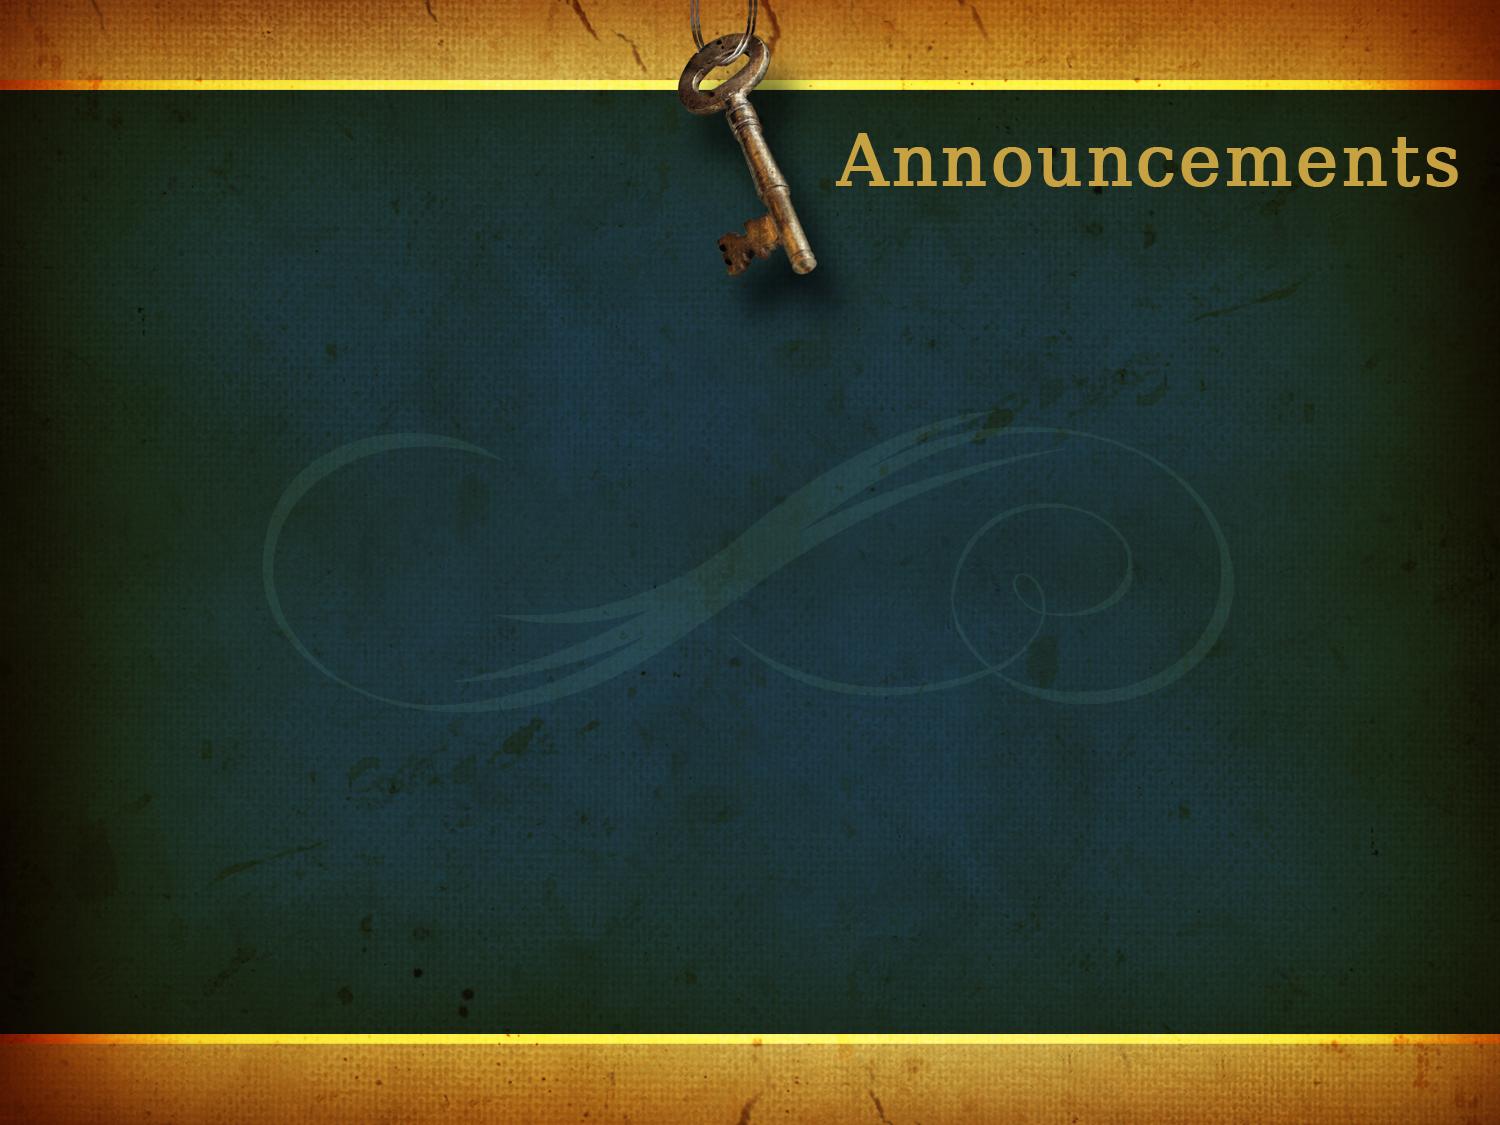 Announcements Backgrounds powerpoint backgrounds